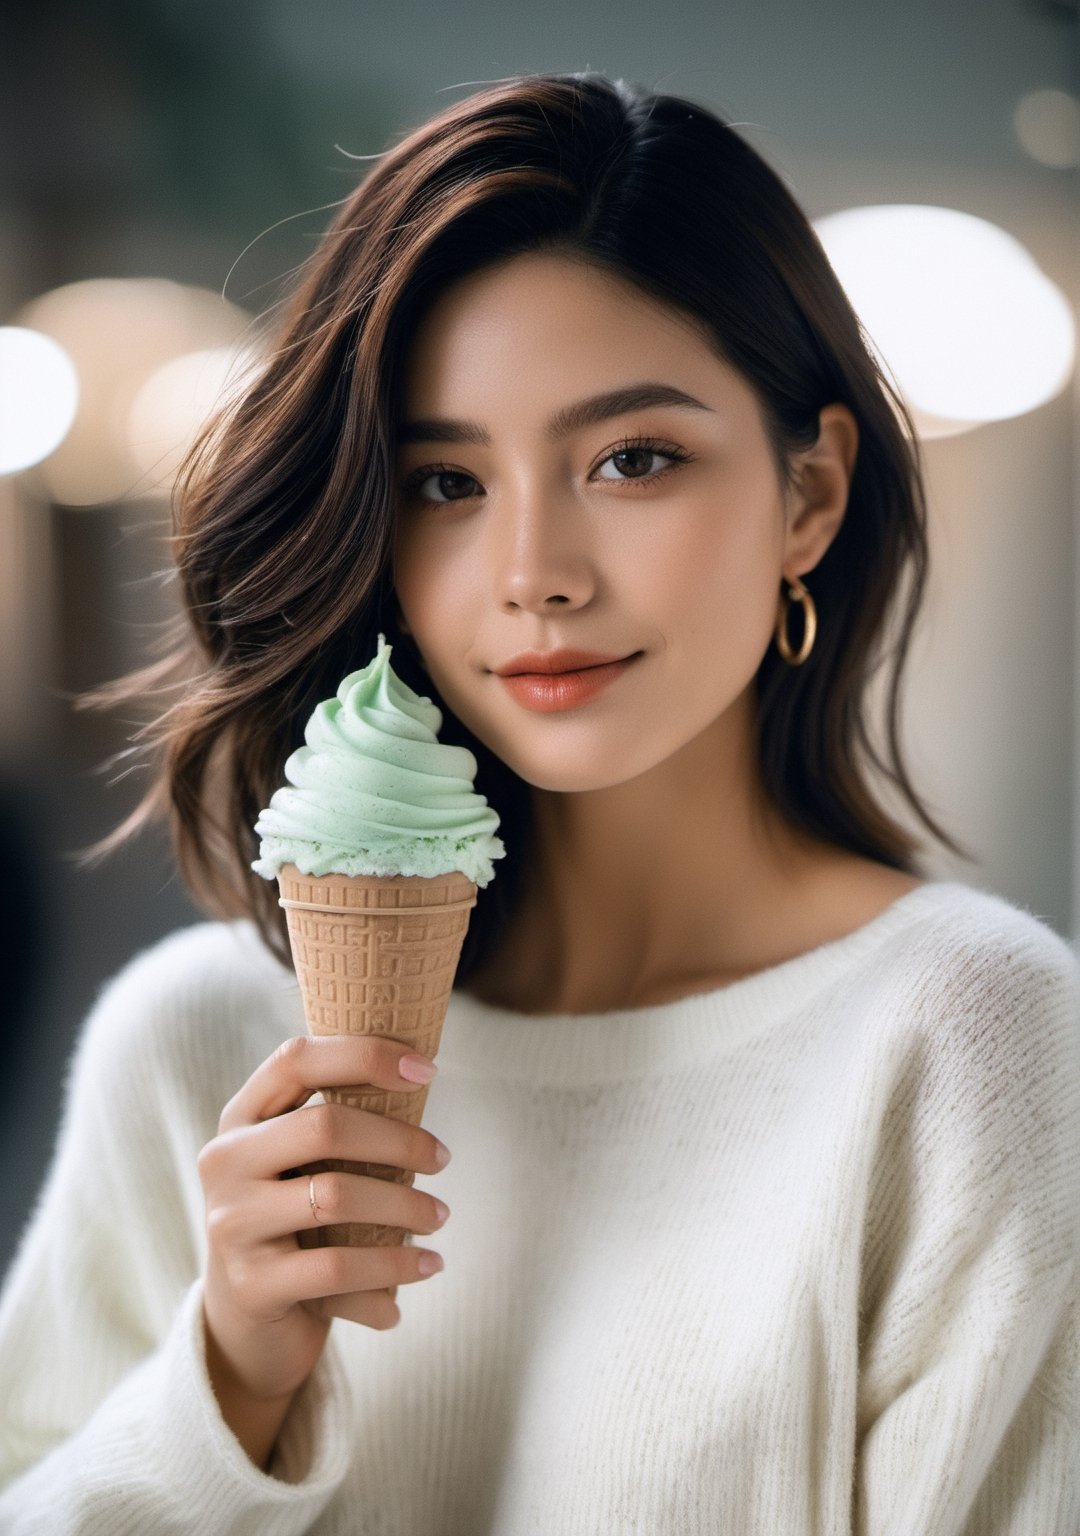 advertisement photo, a woman with short hair and ((a white sweater)), white sweater:1.3,
BREAK
, holding a (mint ice cream) in her hand and looking at the camera, a big smile, it is fucking delicious